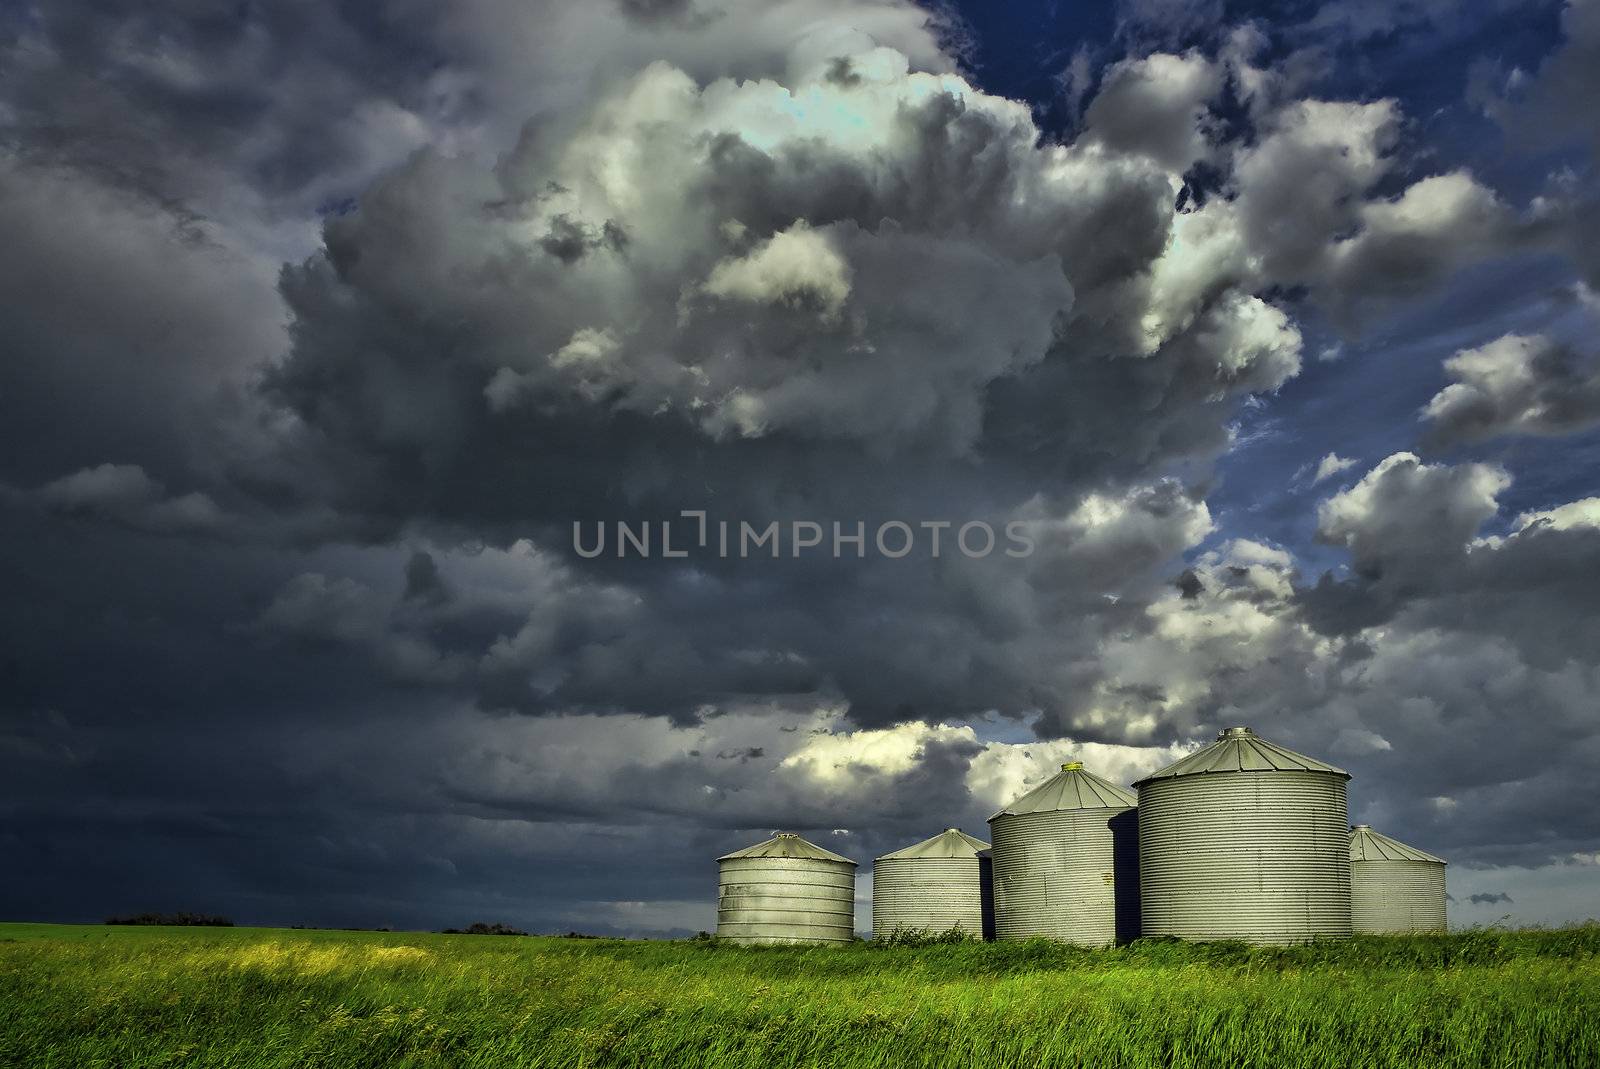 Threatening, powerful clouds over grain silos in Alberta, Canada on a stormy late afternoon.